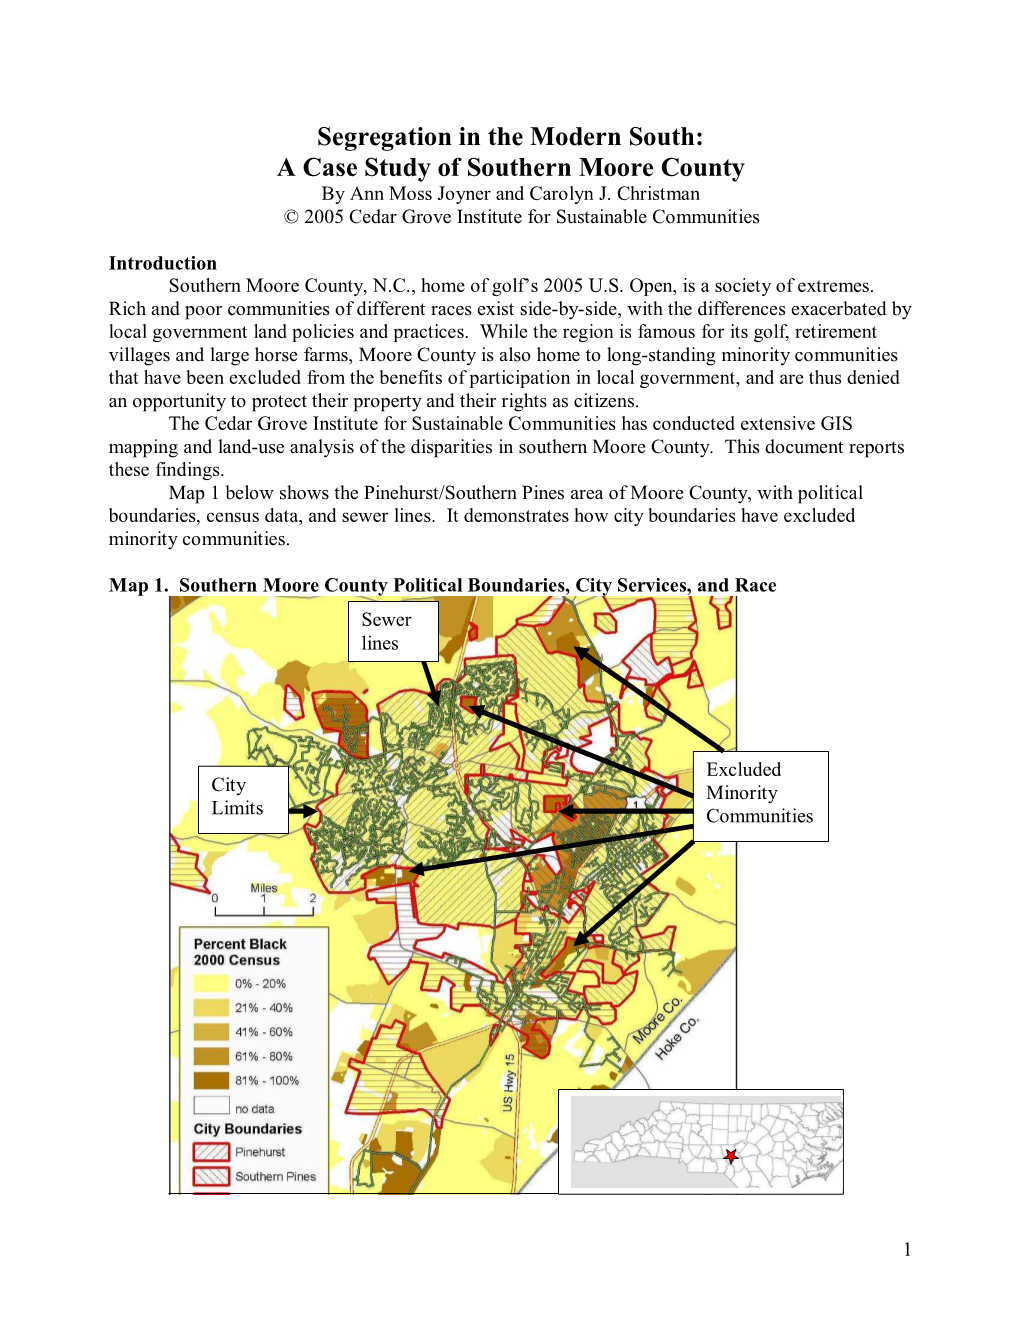 Southern Moore County Case Study